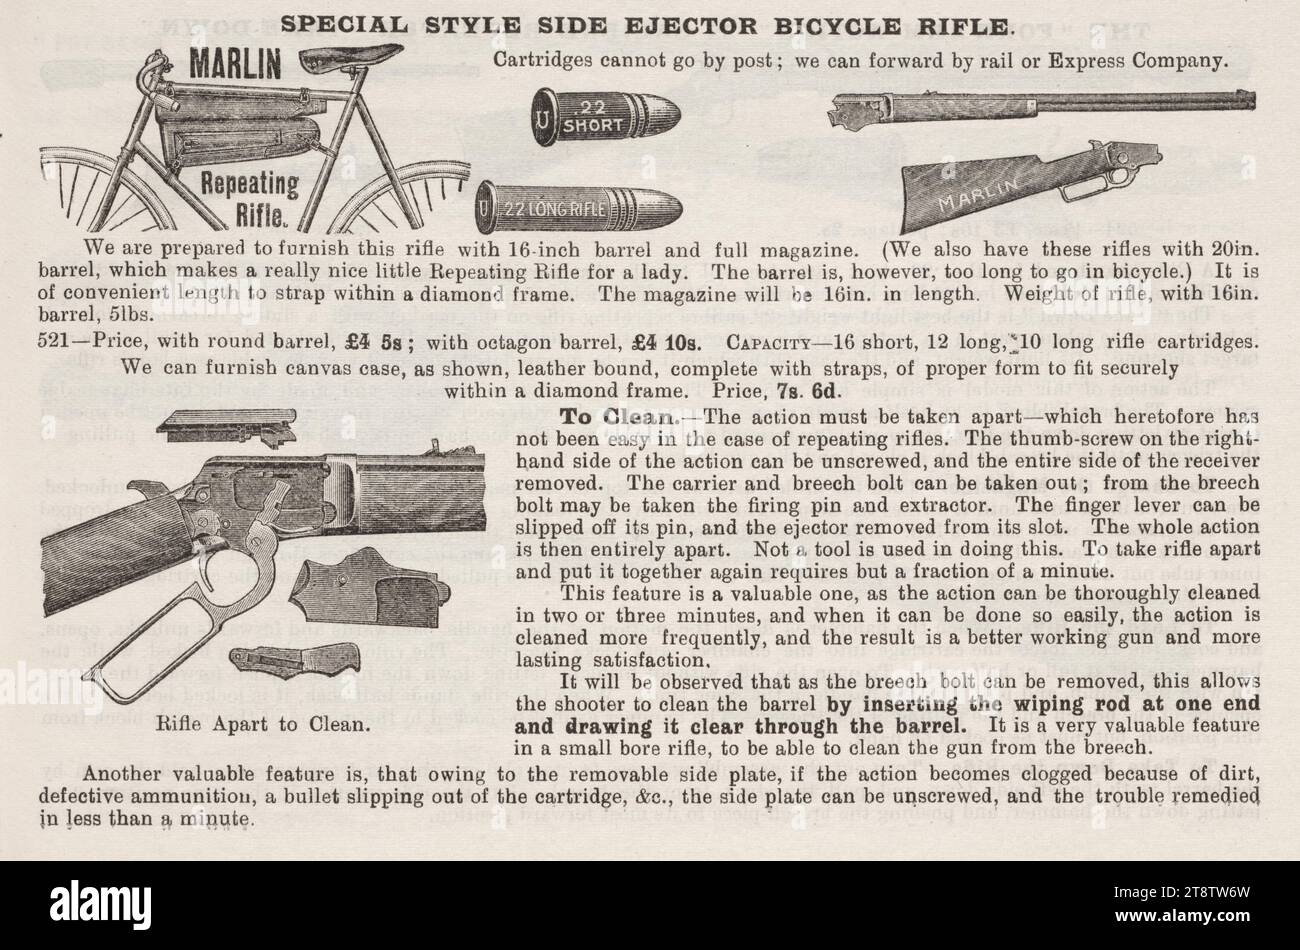 A & W McCarthy (Firm): Special style side ejector bicycle rifle 1902, An advertisement for a Marlin repeating rifle with an illustration of one attached to a bicycle. Two sizes of bullet are shown, and there is an illustration of the rifle taken apart for cleaning. The text gives cleaning instructions Stock Photo